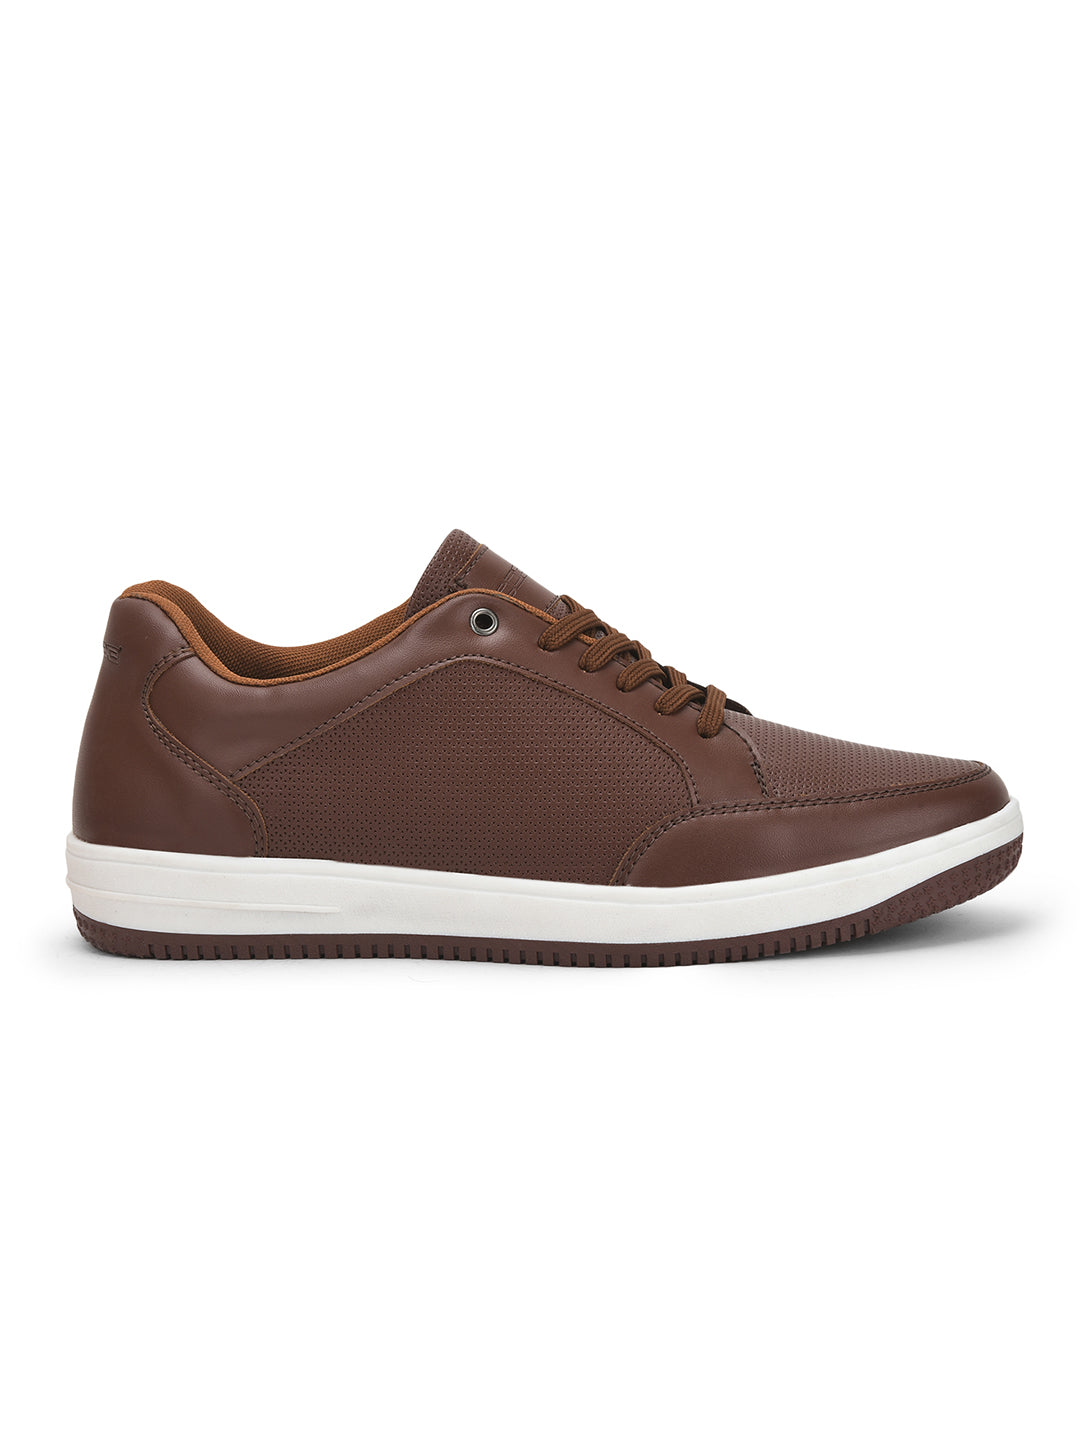 Buy CARLO ROMANO Men Tan Brown Solid Leather Sneakers - Casual Shoes for  Men 13411784 | Myntra